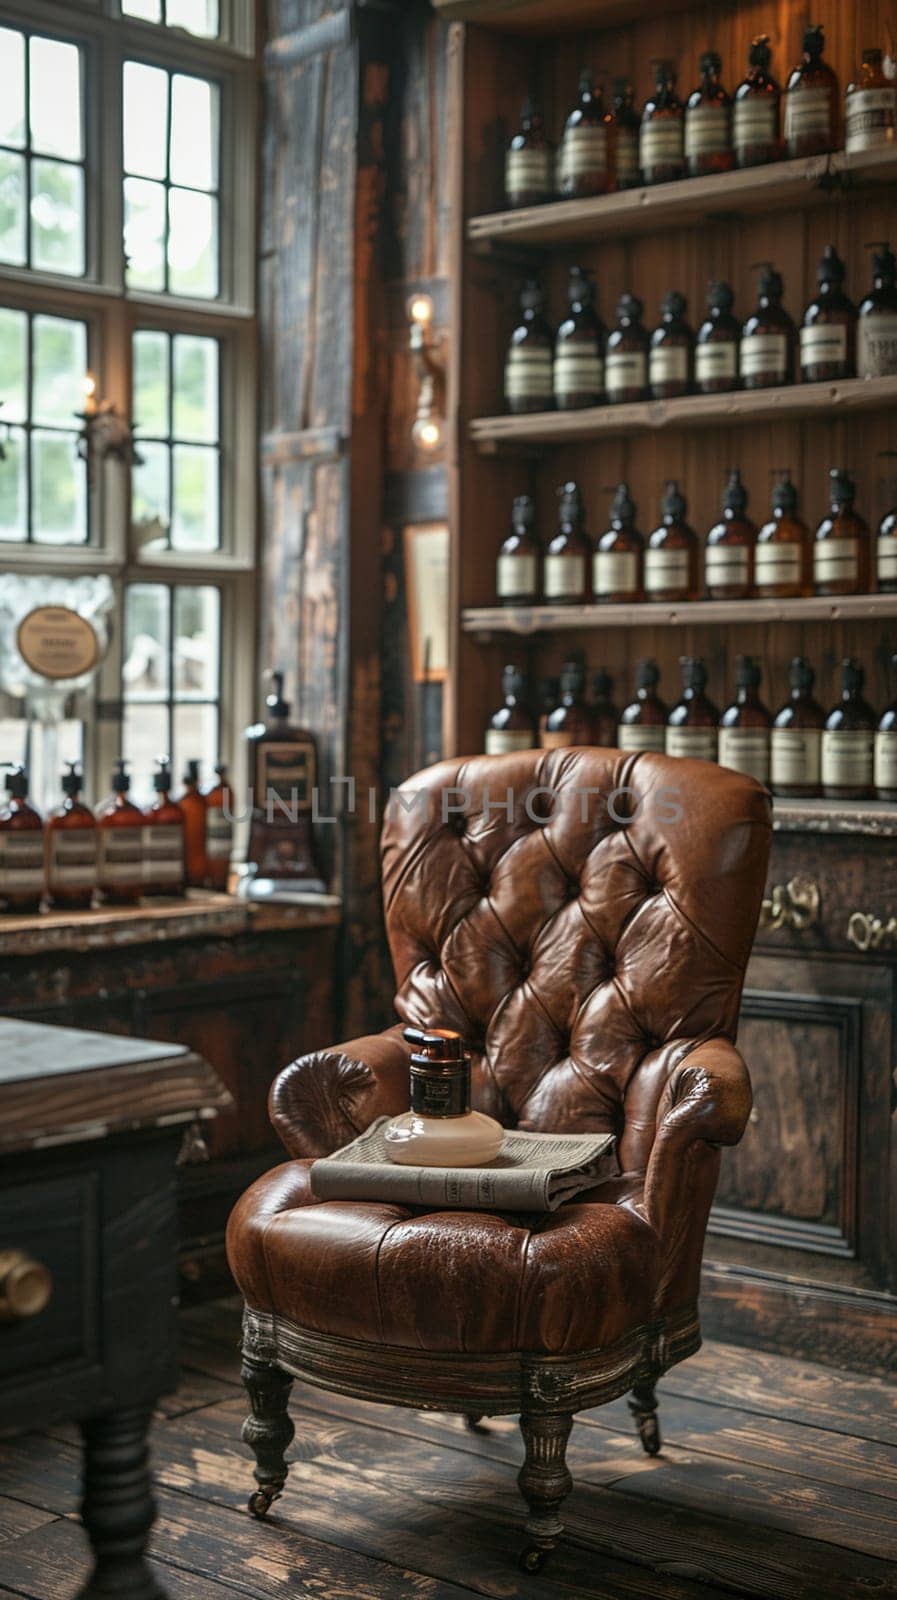 Aged Leather Pedestal in a Gentleman's Club Environment, The leather merges with the backdrop of luxury and masculinity, ideal for men's grooming products.